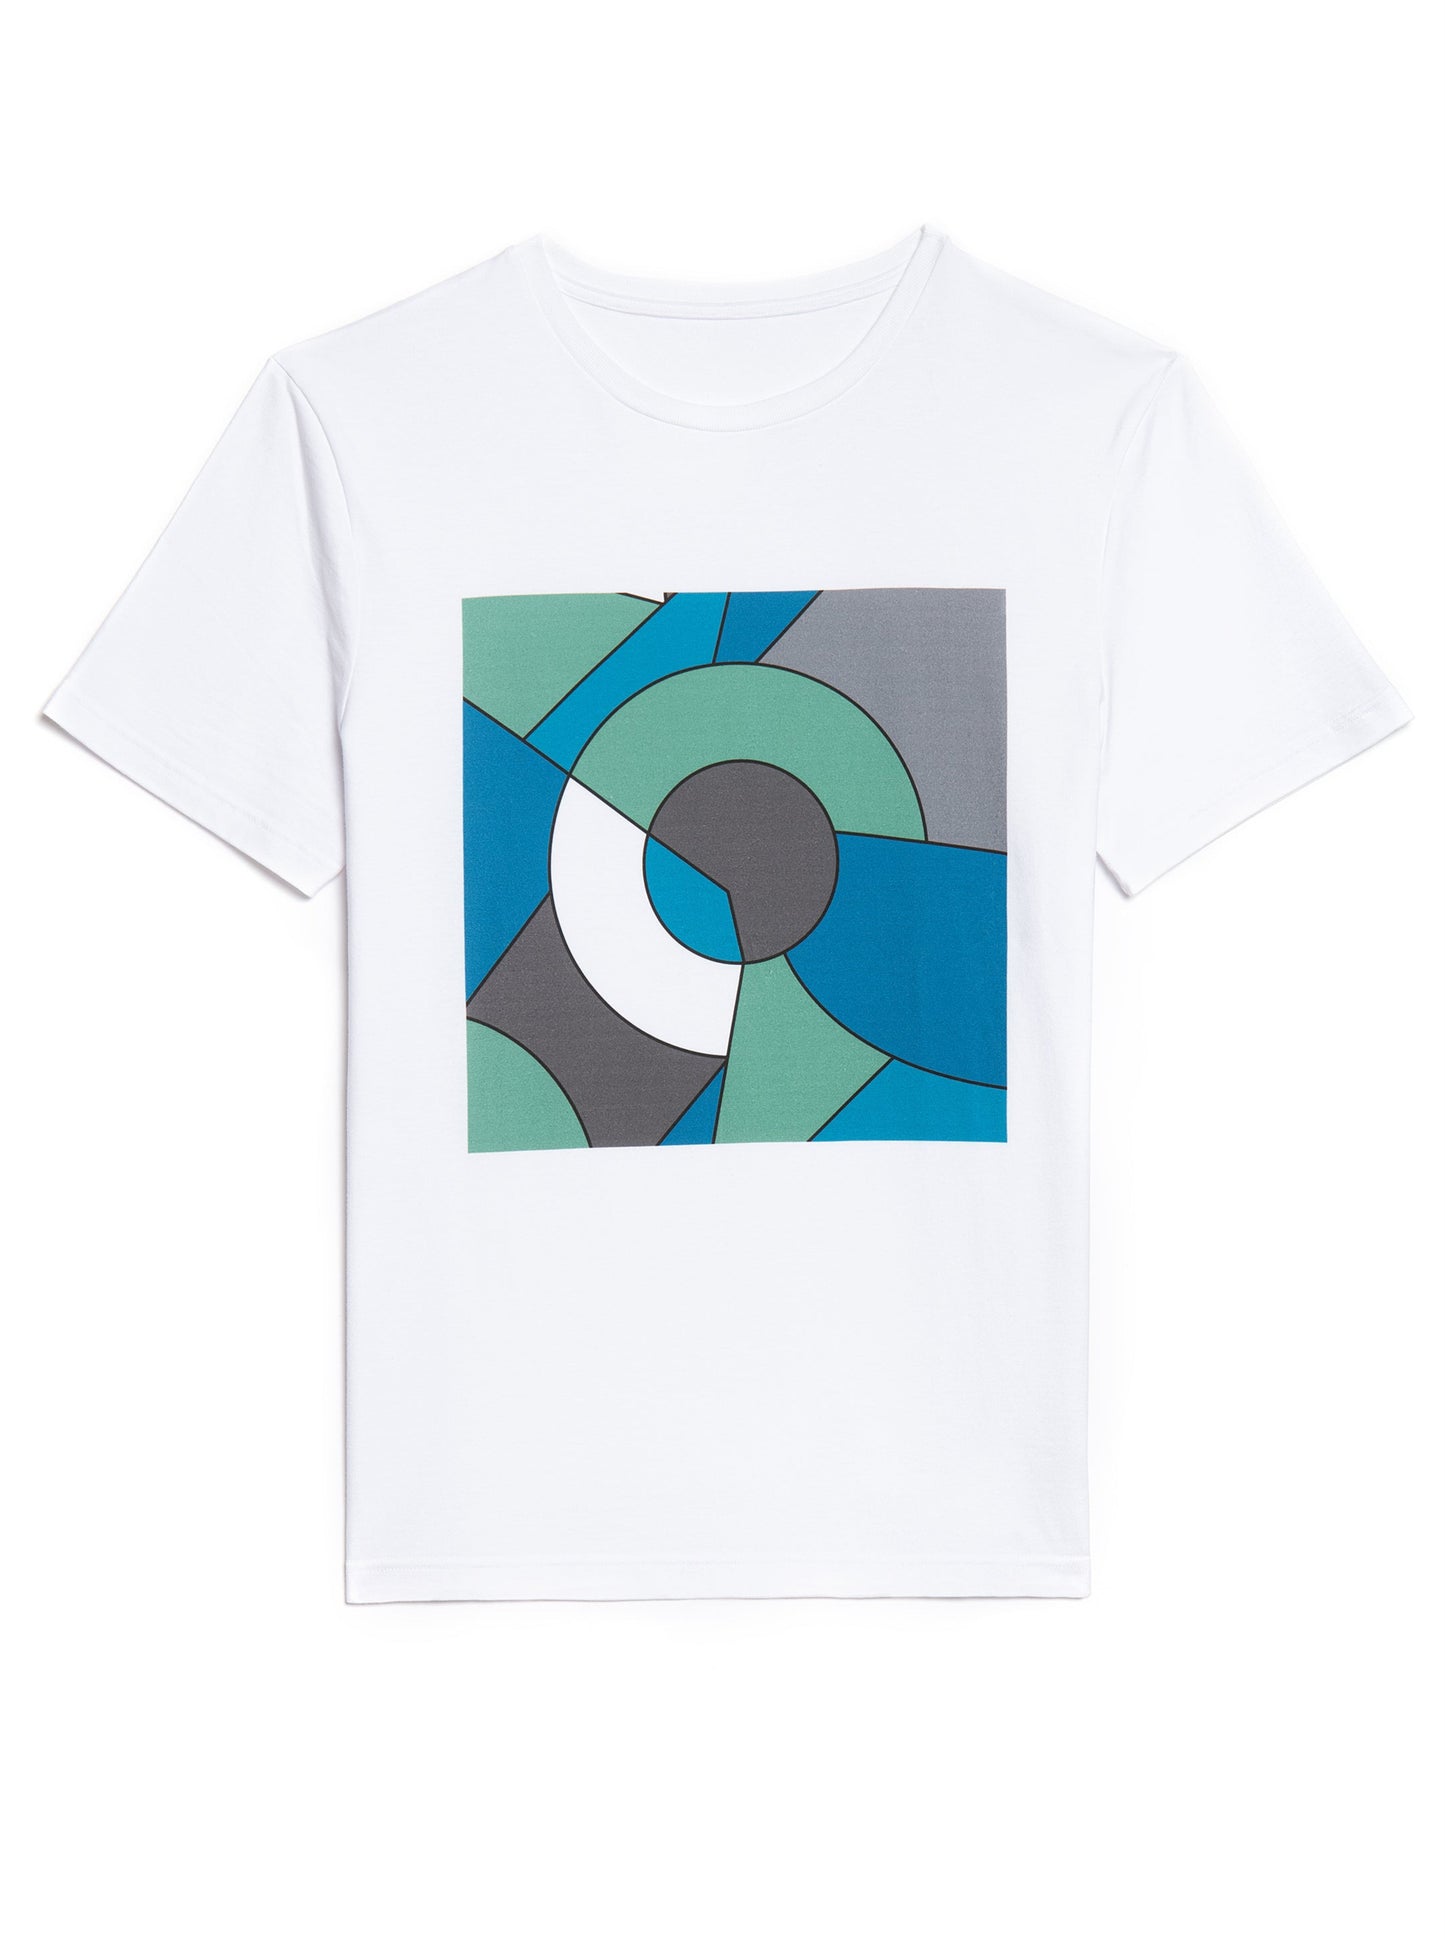 white cotton t-shirt with square print in geometric shapes of green, blue and grey